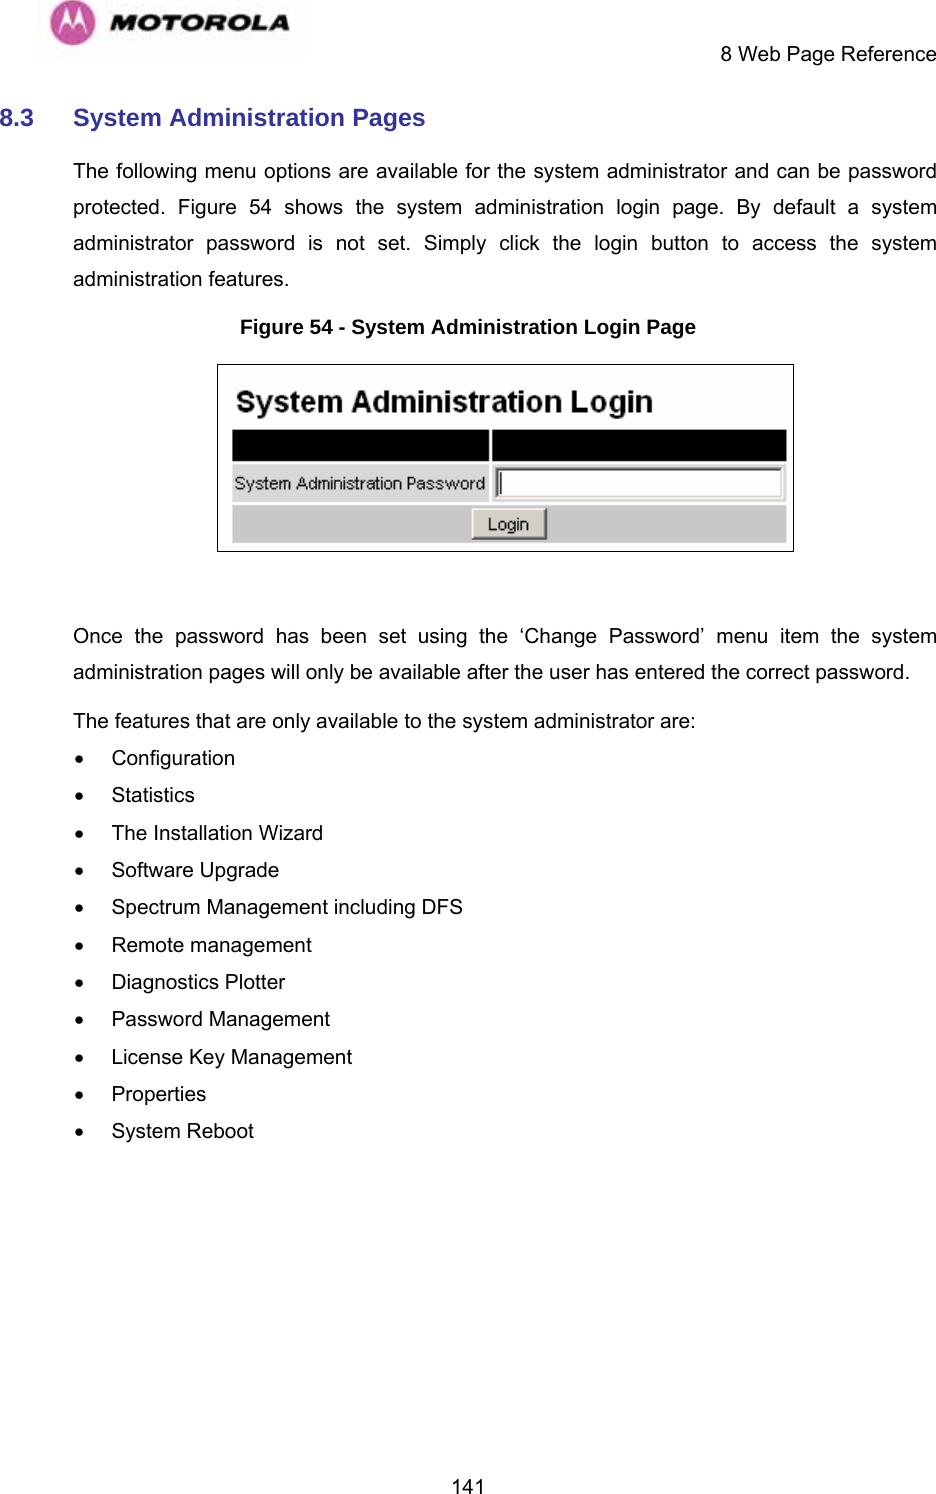     8 Web Page Reference  1418.3  System Administration Pages  The following menu options are available for the system administrator and can be password protected.  Figure 54 shows the system administration login page. By default a system administrator password is not set. Simply click the login button to access the system administration features.  Figure 54 - System Administration Login Page   Once the password has been set using the ‘Change Password’ menu item the system administration pages will only be available after the user has entered the correct password. The features that are only available to the system administrator are: • Configuration • Statistics •  The Installation Wizard • Software Upgrade •  Spectrum Management including DFS • Remote management • Diagnostics Plotter • Password Management •  License Key Management • Properties • System Reboot 